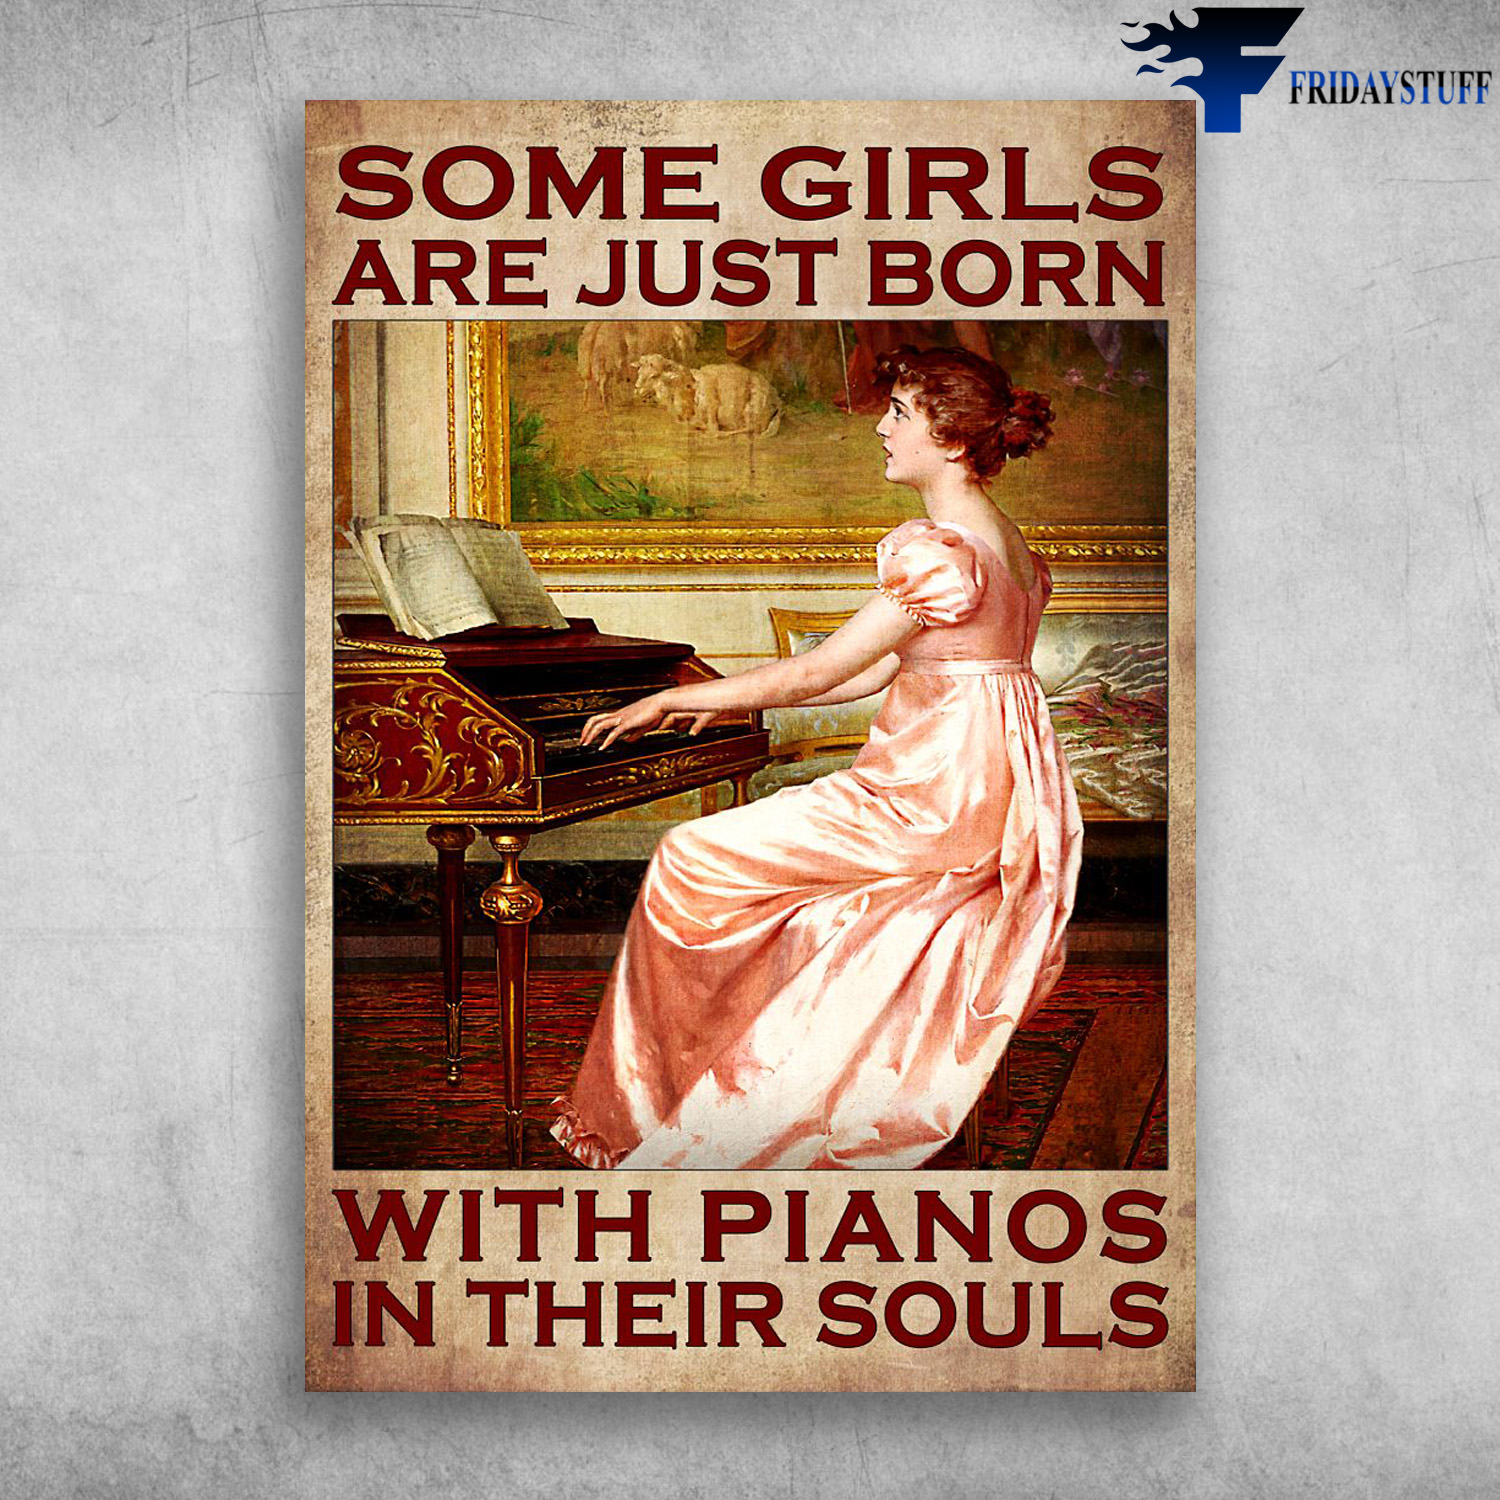 Girl Playing Piano - Some Girls Are Just Born, With Pianos In Their Souls